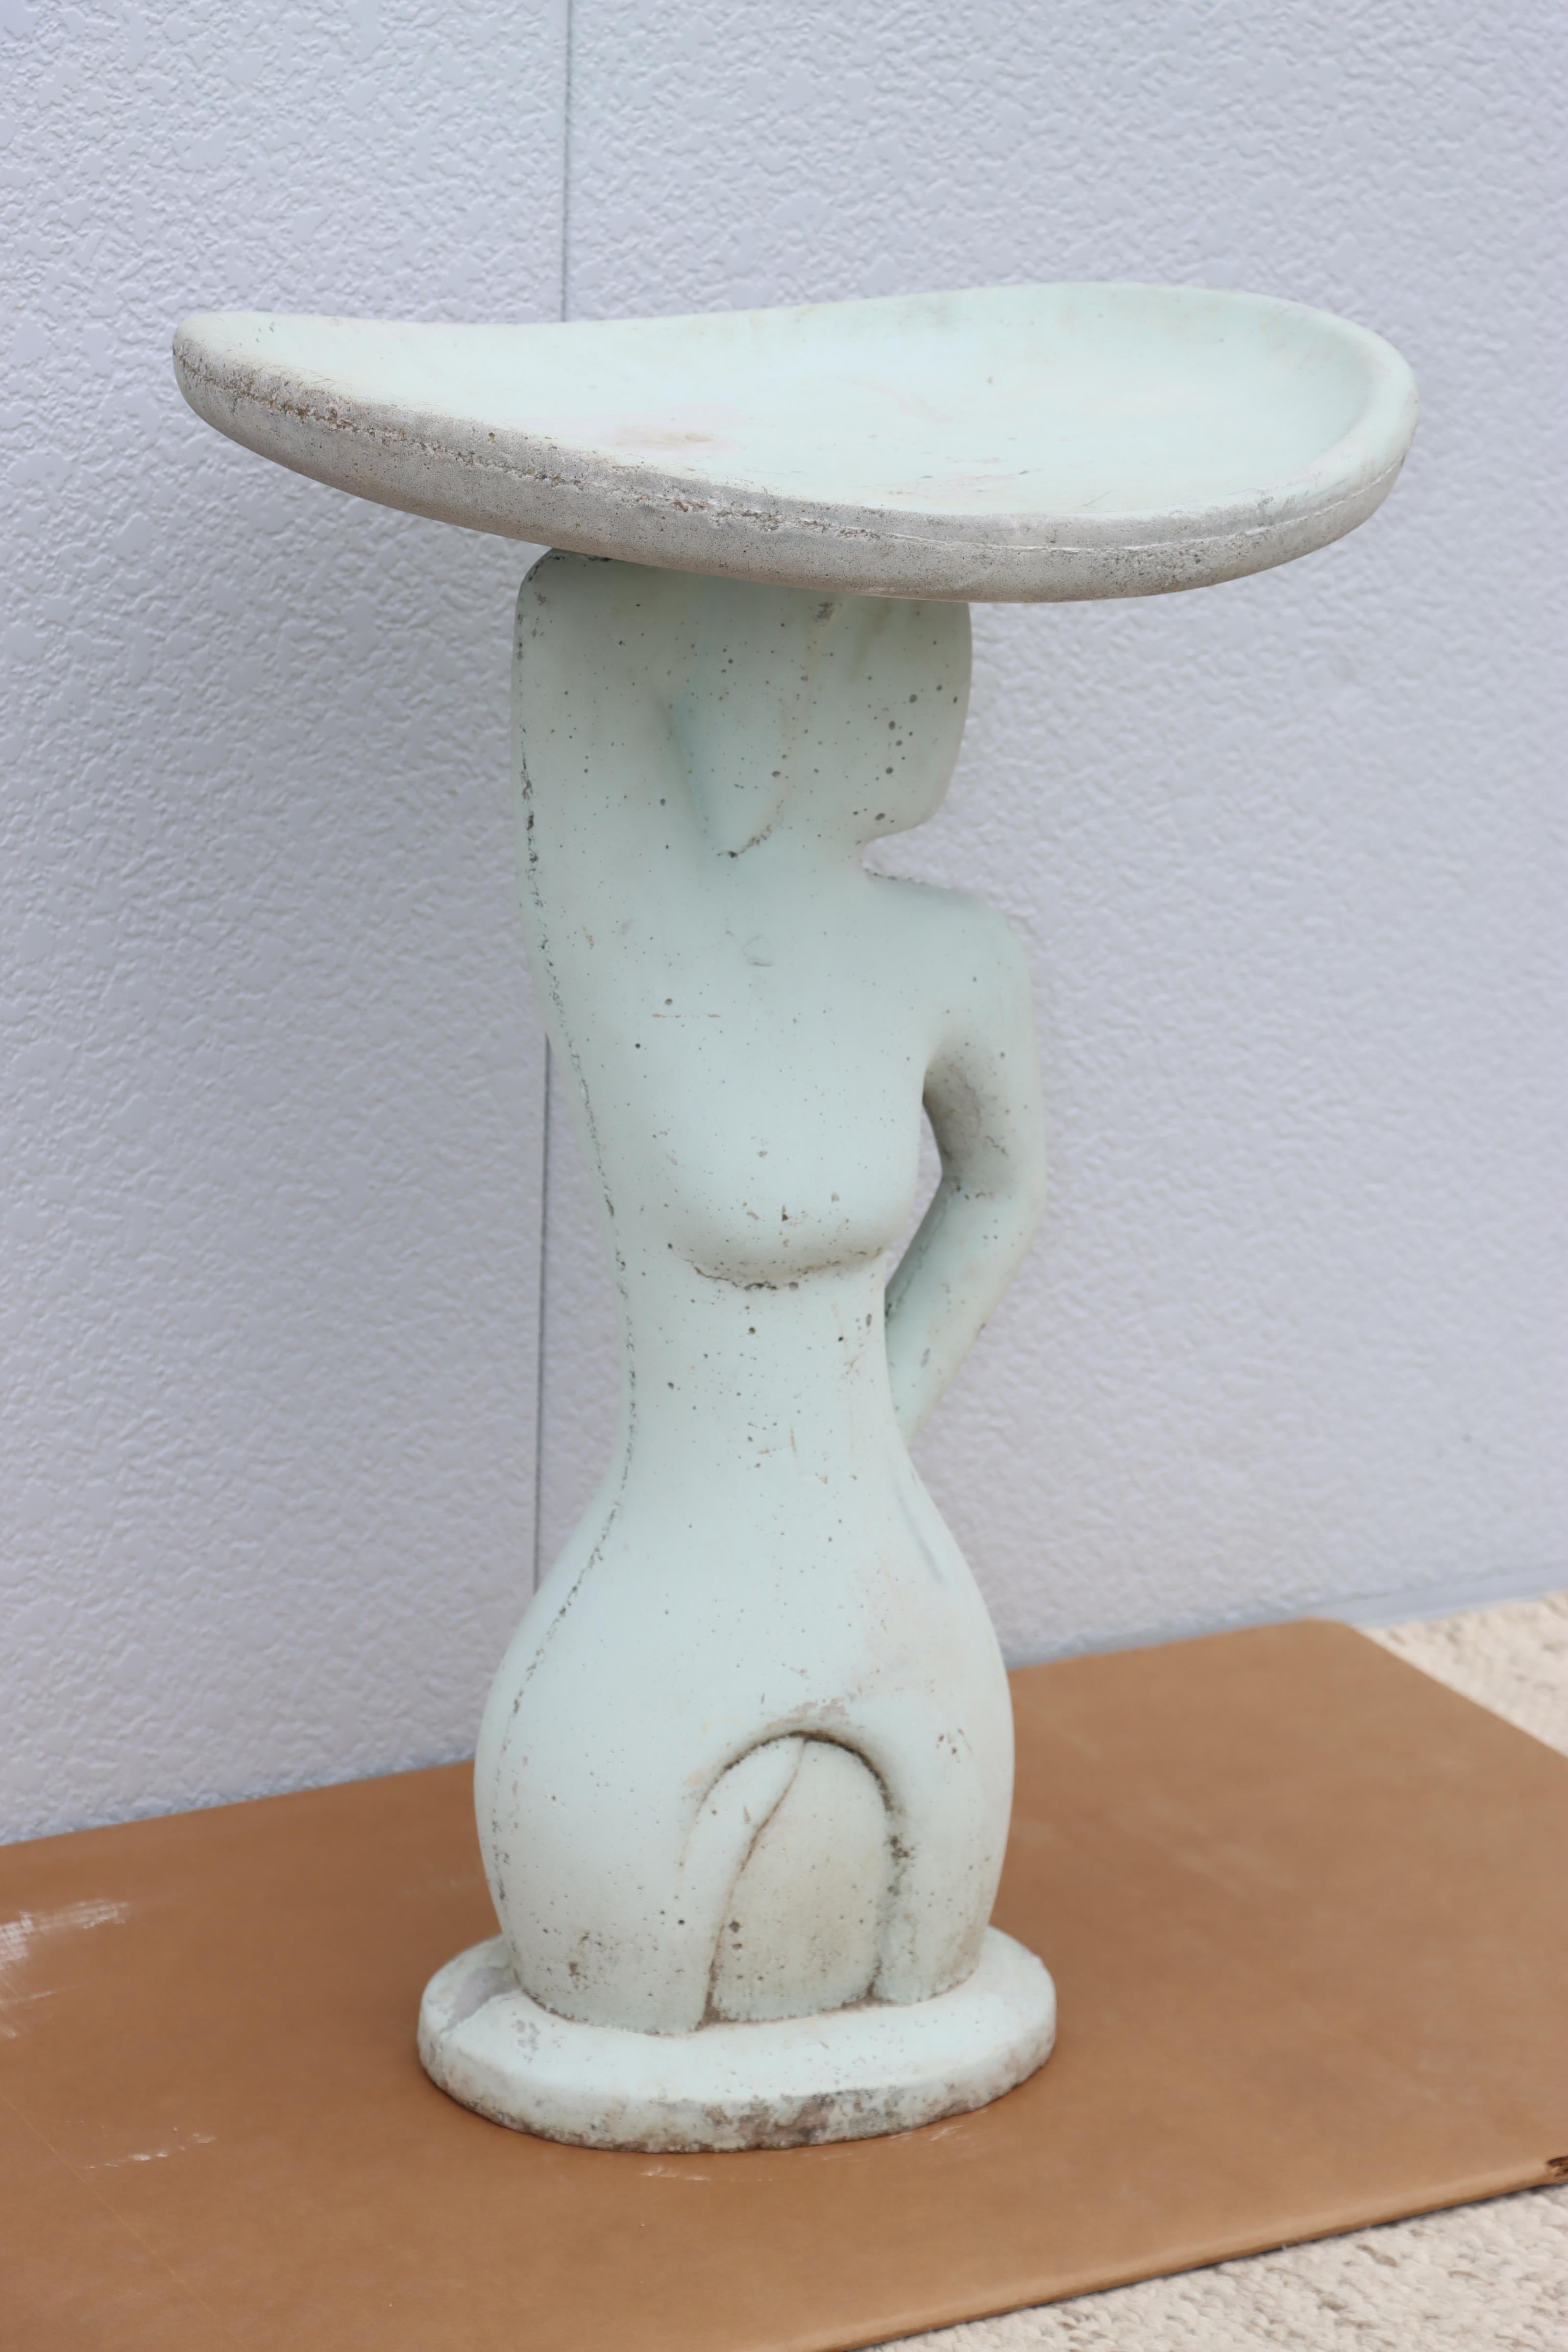 1960s Mid-Century Modern bird bath designed by a Virginia artist this one is one of only of 10 made, in vintage original condition with some wear and patina due to age and use, there is a small chip to the back of the base.